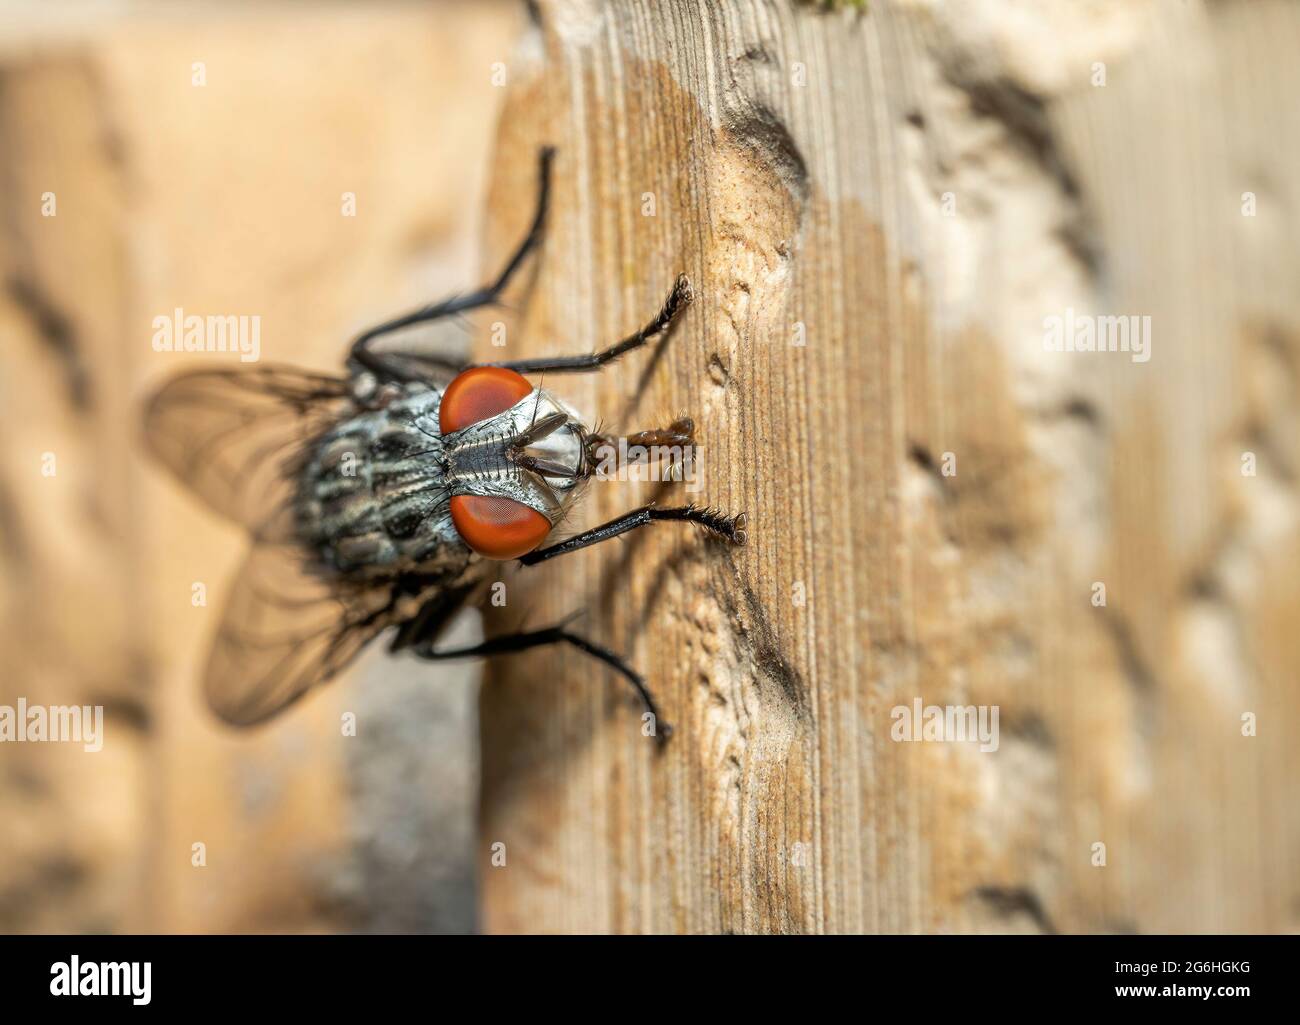 A fly stands on the wall of the building Stock Photo